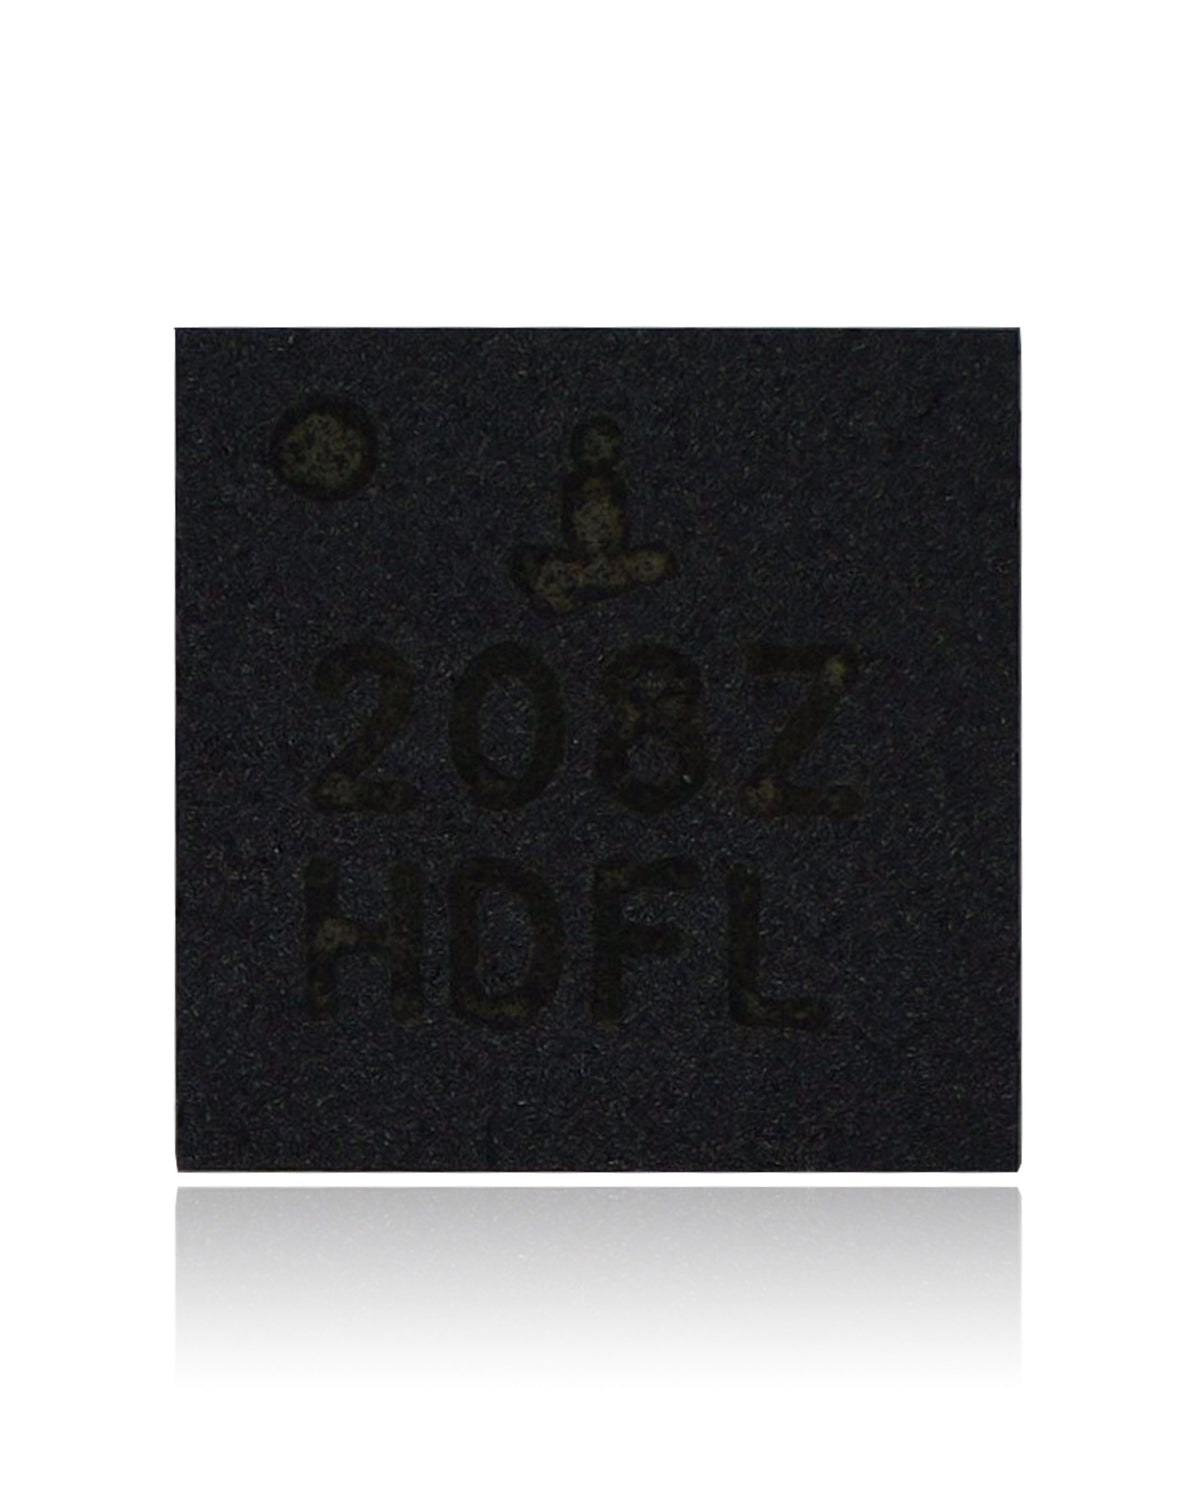 HIGH VOLTAGE SYNCHRONOUS RECTIFIED BUCK MOSFET CONTROLLER IC COMPATIBLE WITH MACBOOKS (INTERSIL: ISL6208CRZ / ISL208Z / 208Z: QFN-8 PIN)